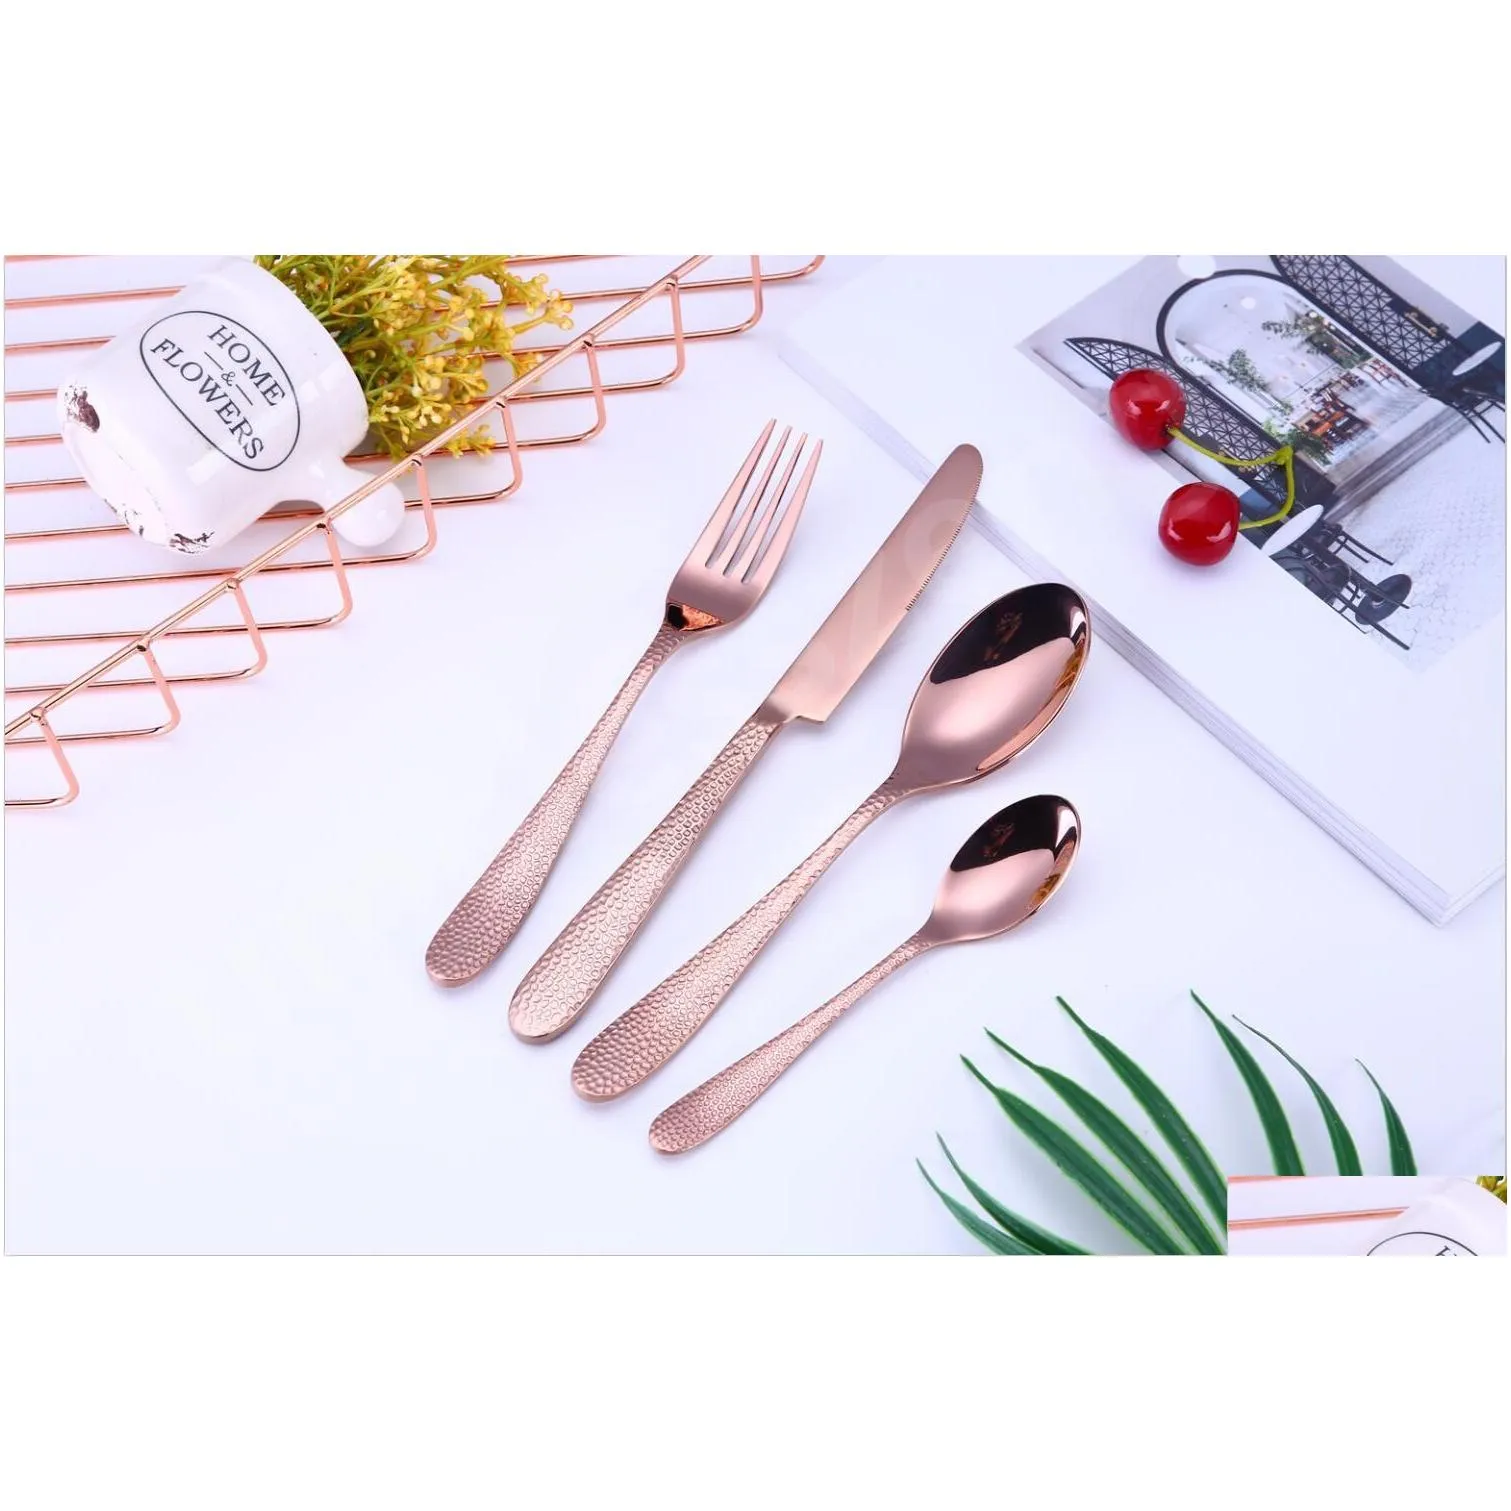 5 colors highgrade gold cutlery flatware set spoon fork knife teaspoon stainless dinnerware sets kitchen tableware set 10 choices